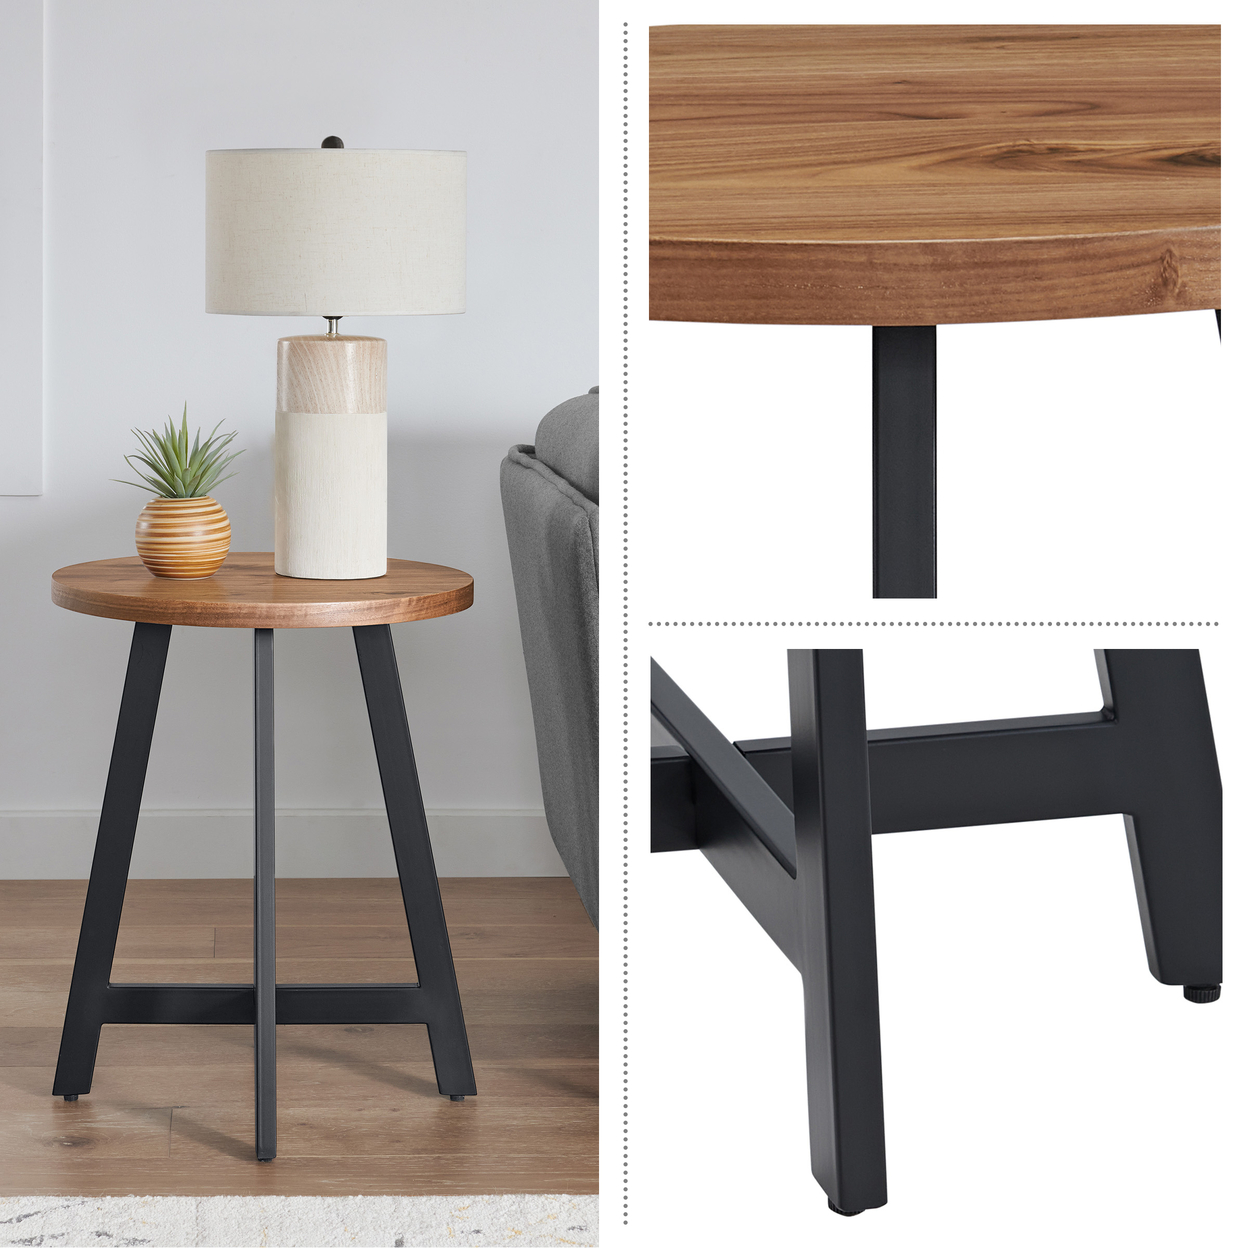 End Table Industrial Side Table MDF Top Metal Frame Round Table, Walnut